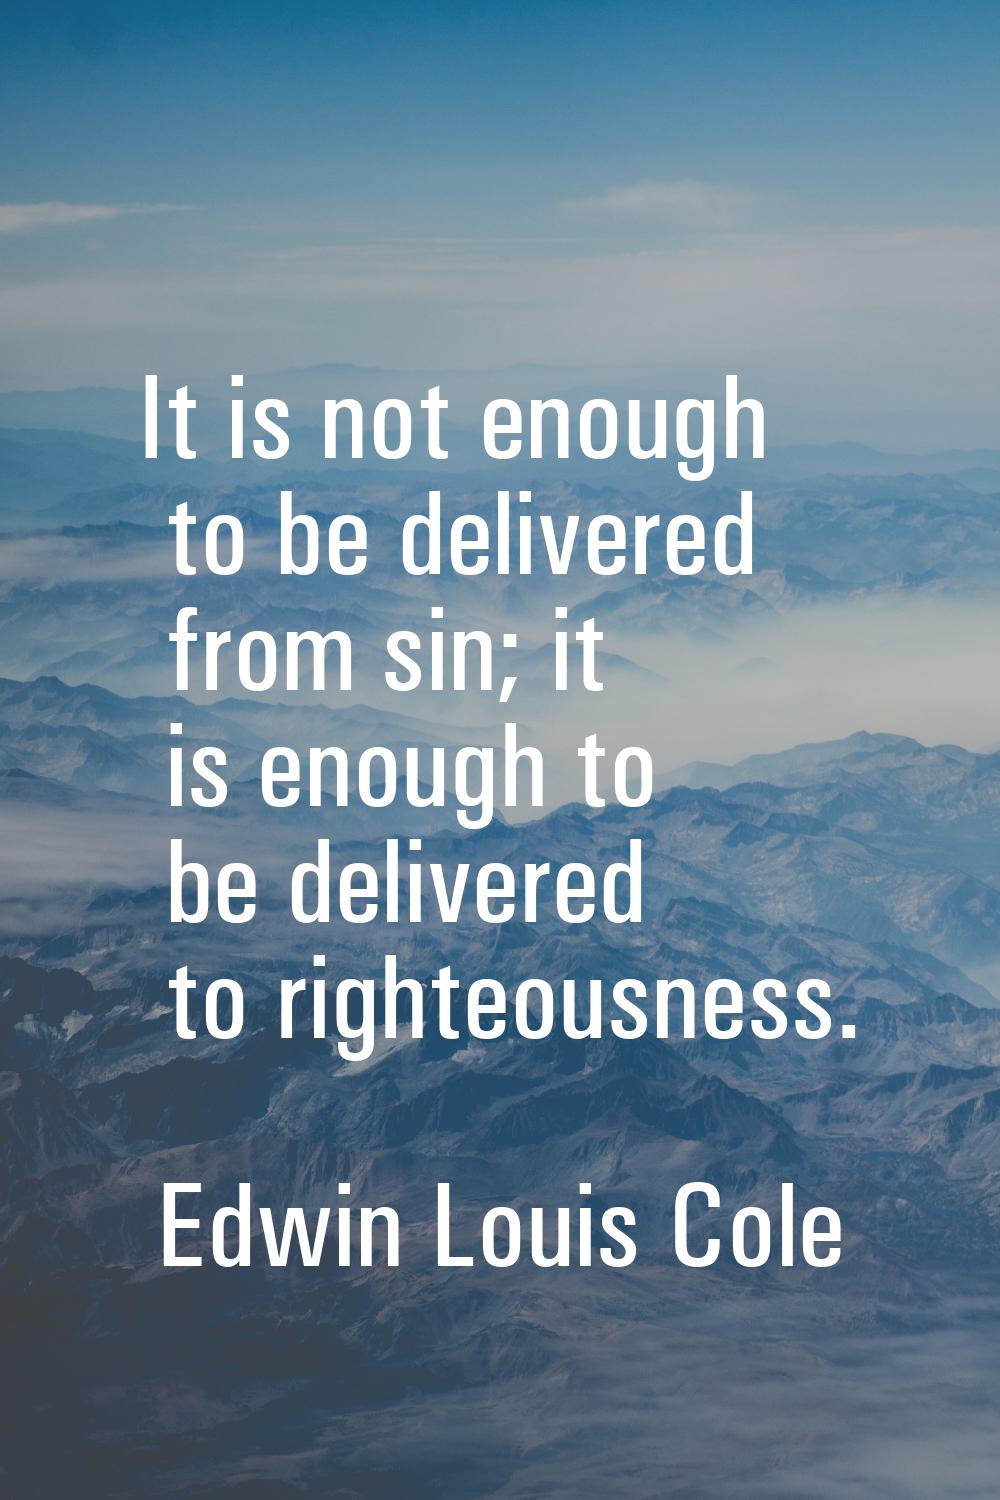 It is not enough to be delivered from sin; it is enough to be delivered to righteousness.